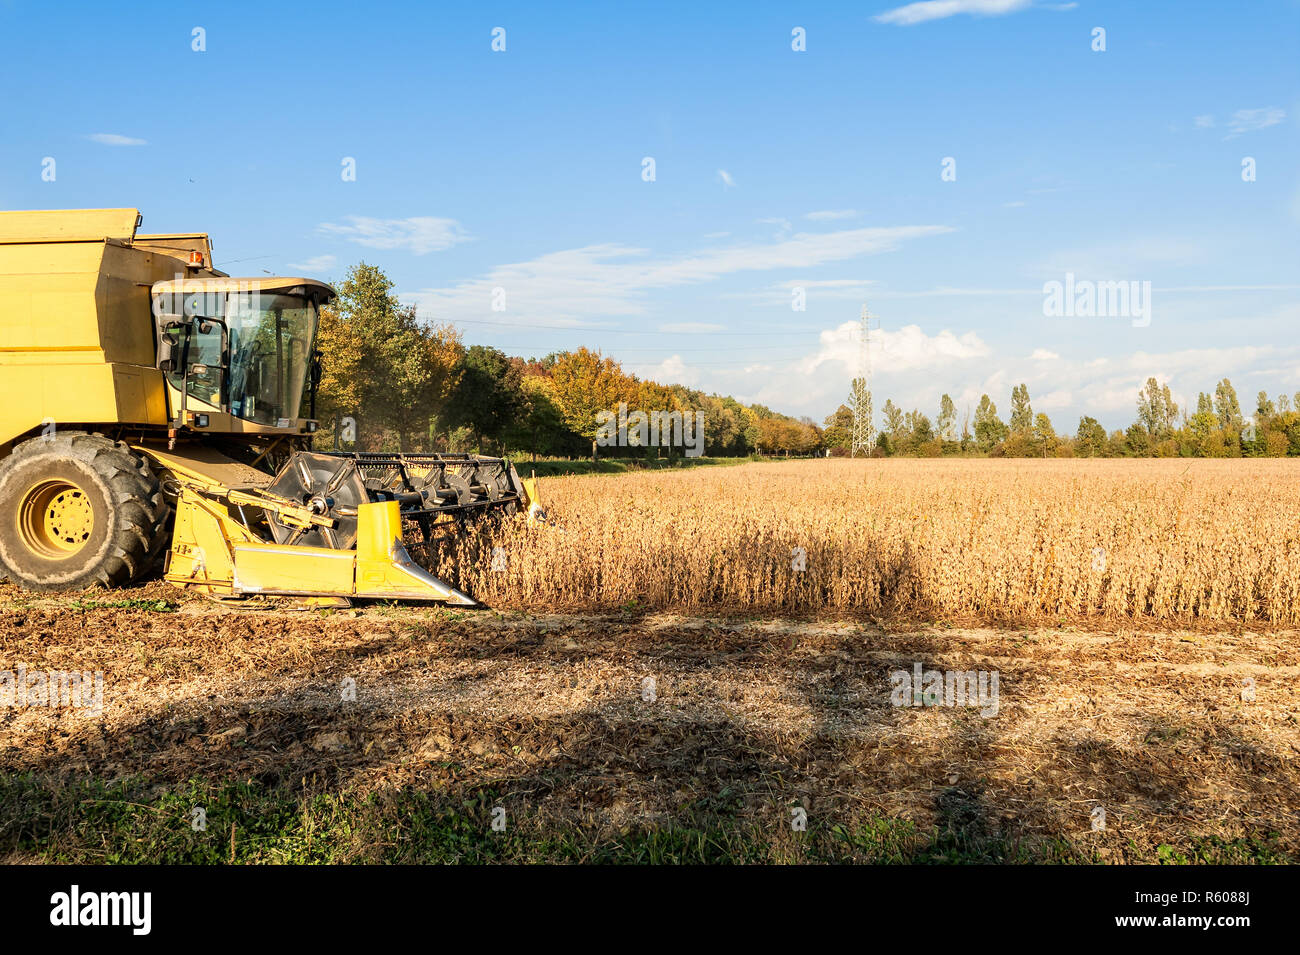 Harvesting of soybean field with combine harvester. Stock Photo